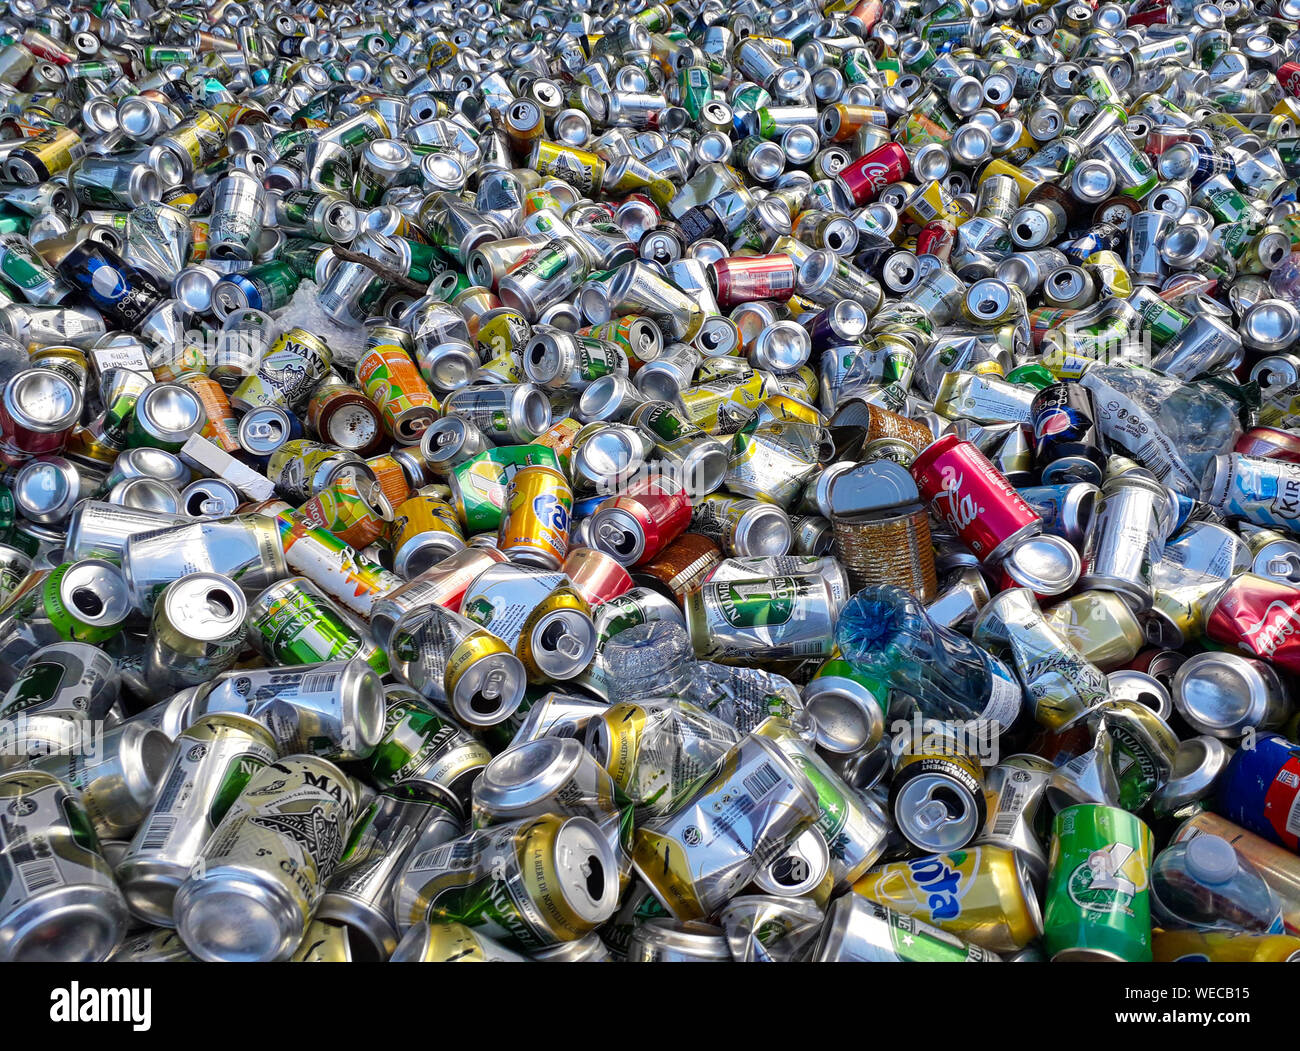 Rubbish, Garbage, wastage - hundreds of cans - save the environment Stock Photo